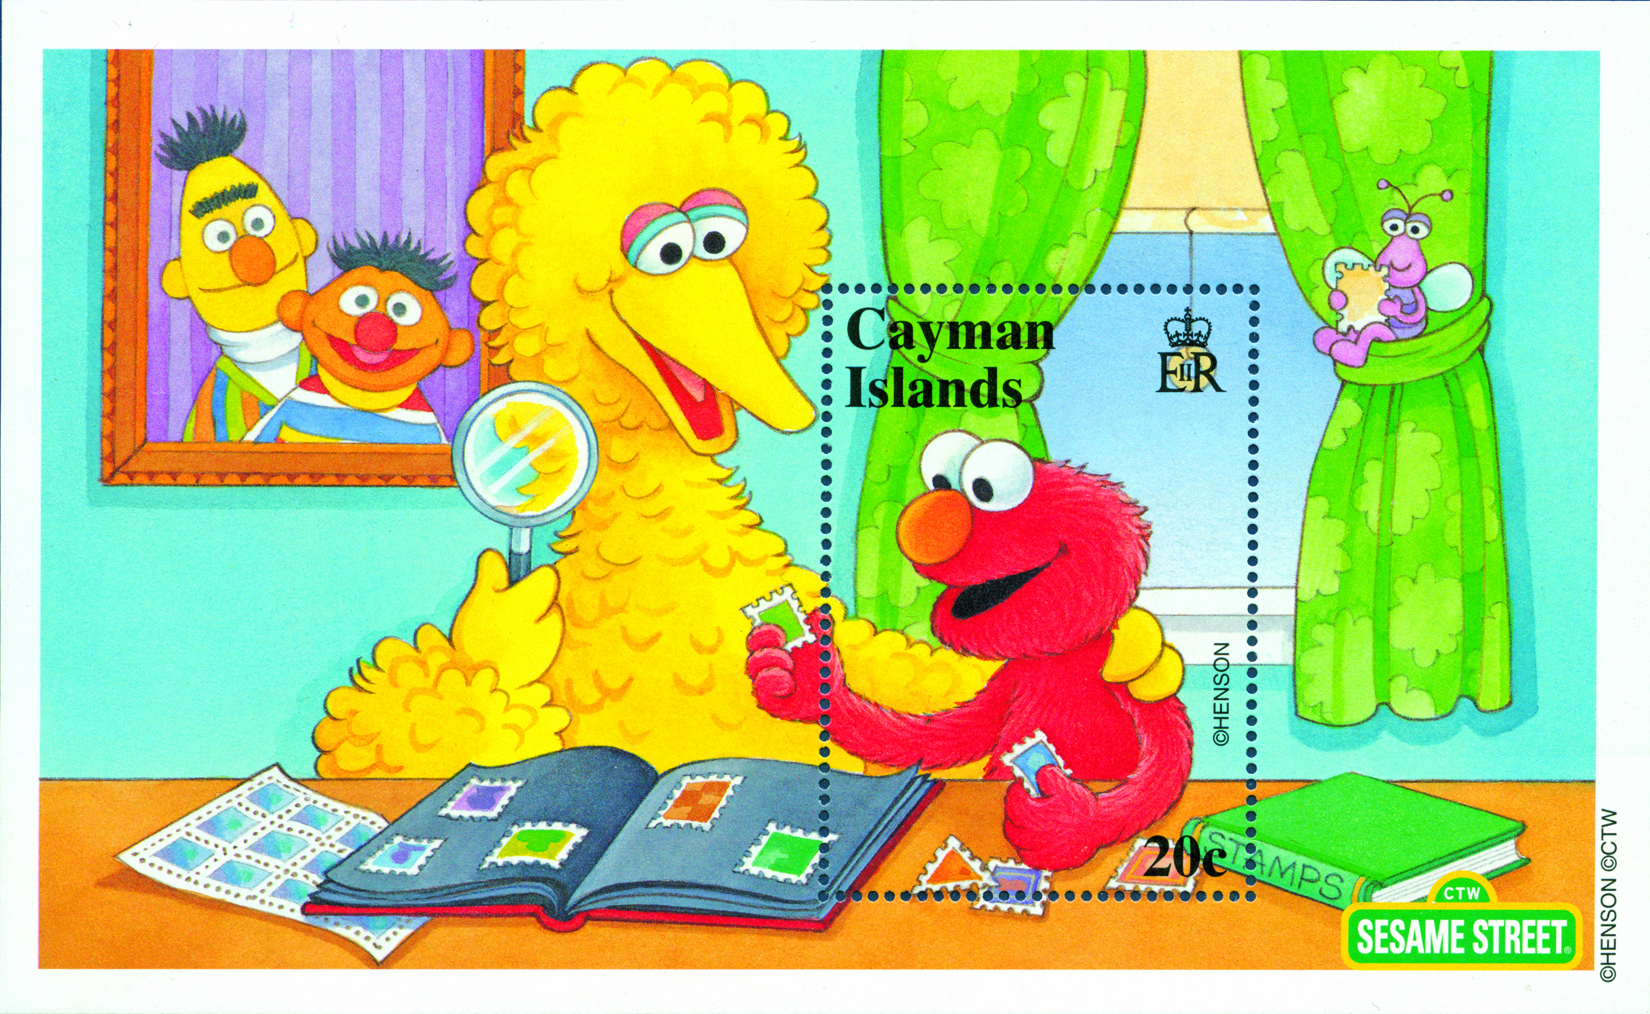 Elmos loves stamp collecting!